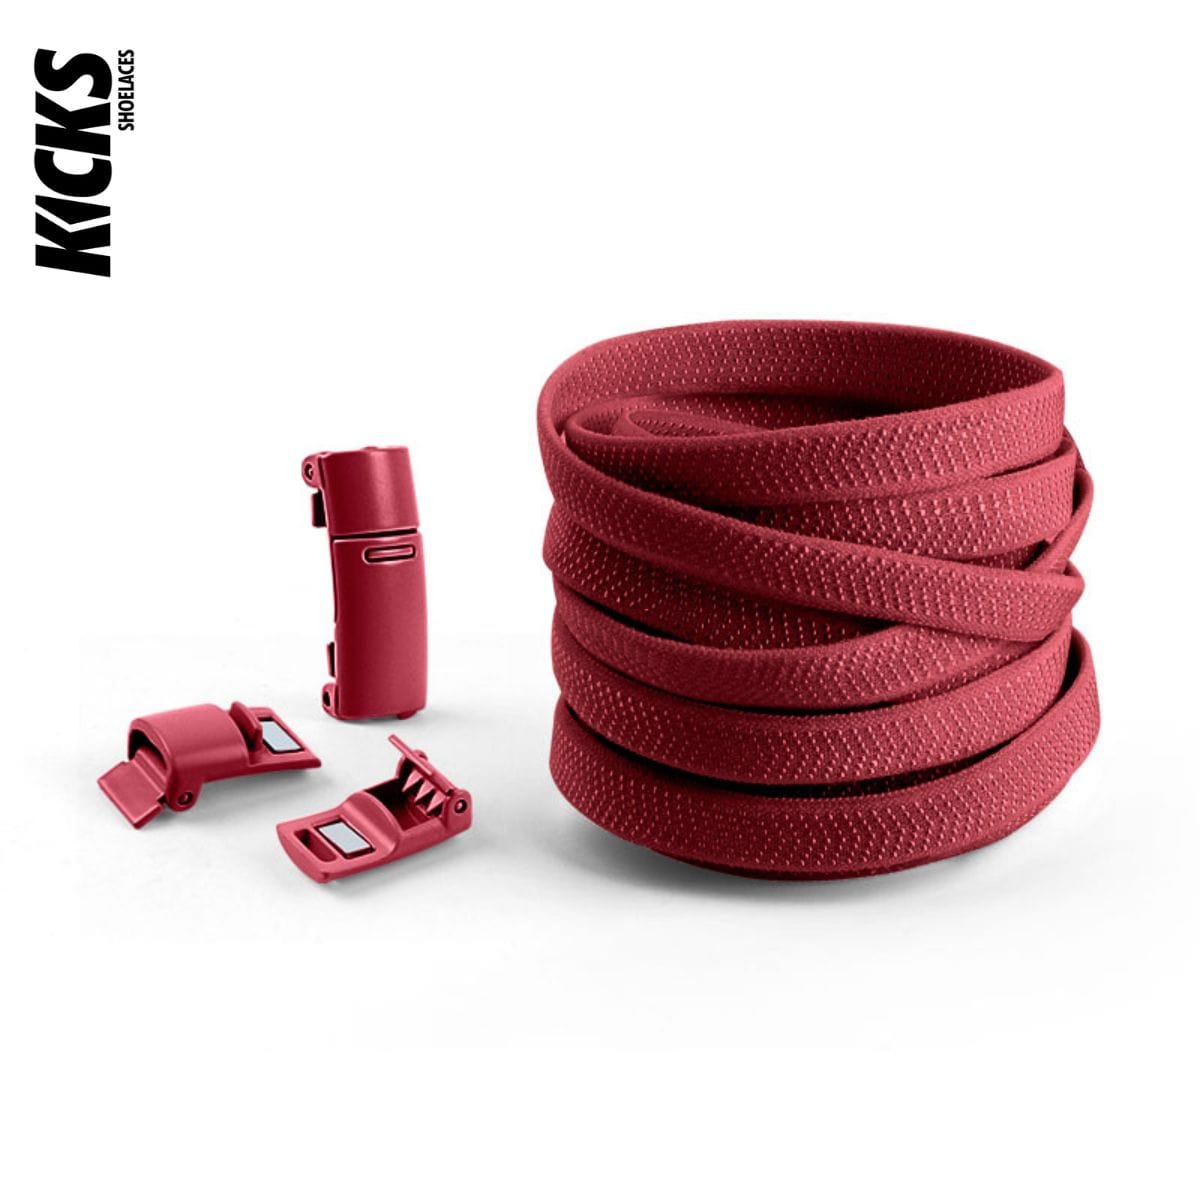 Wine Red No-Tie Shoelaces with Magnetic Locks - Kicks Shoelaces